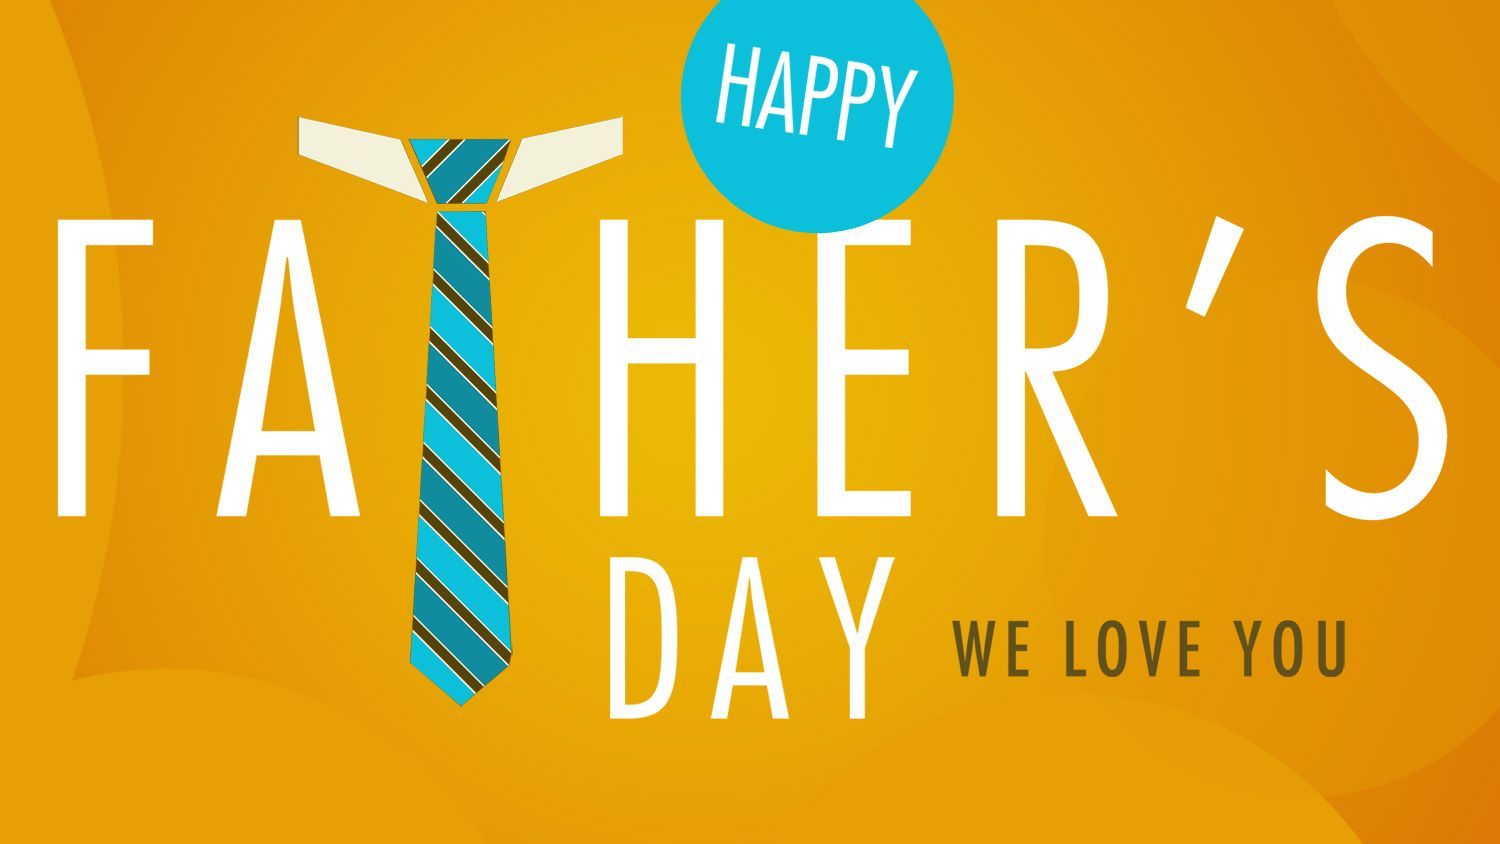 Happy Father's Day Wallpapers download free